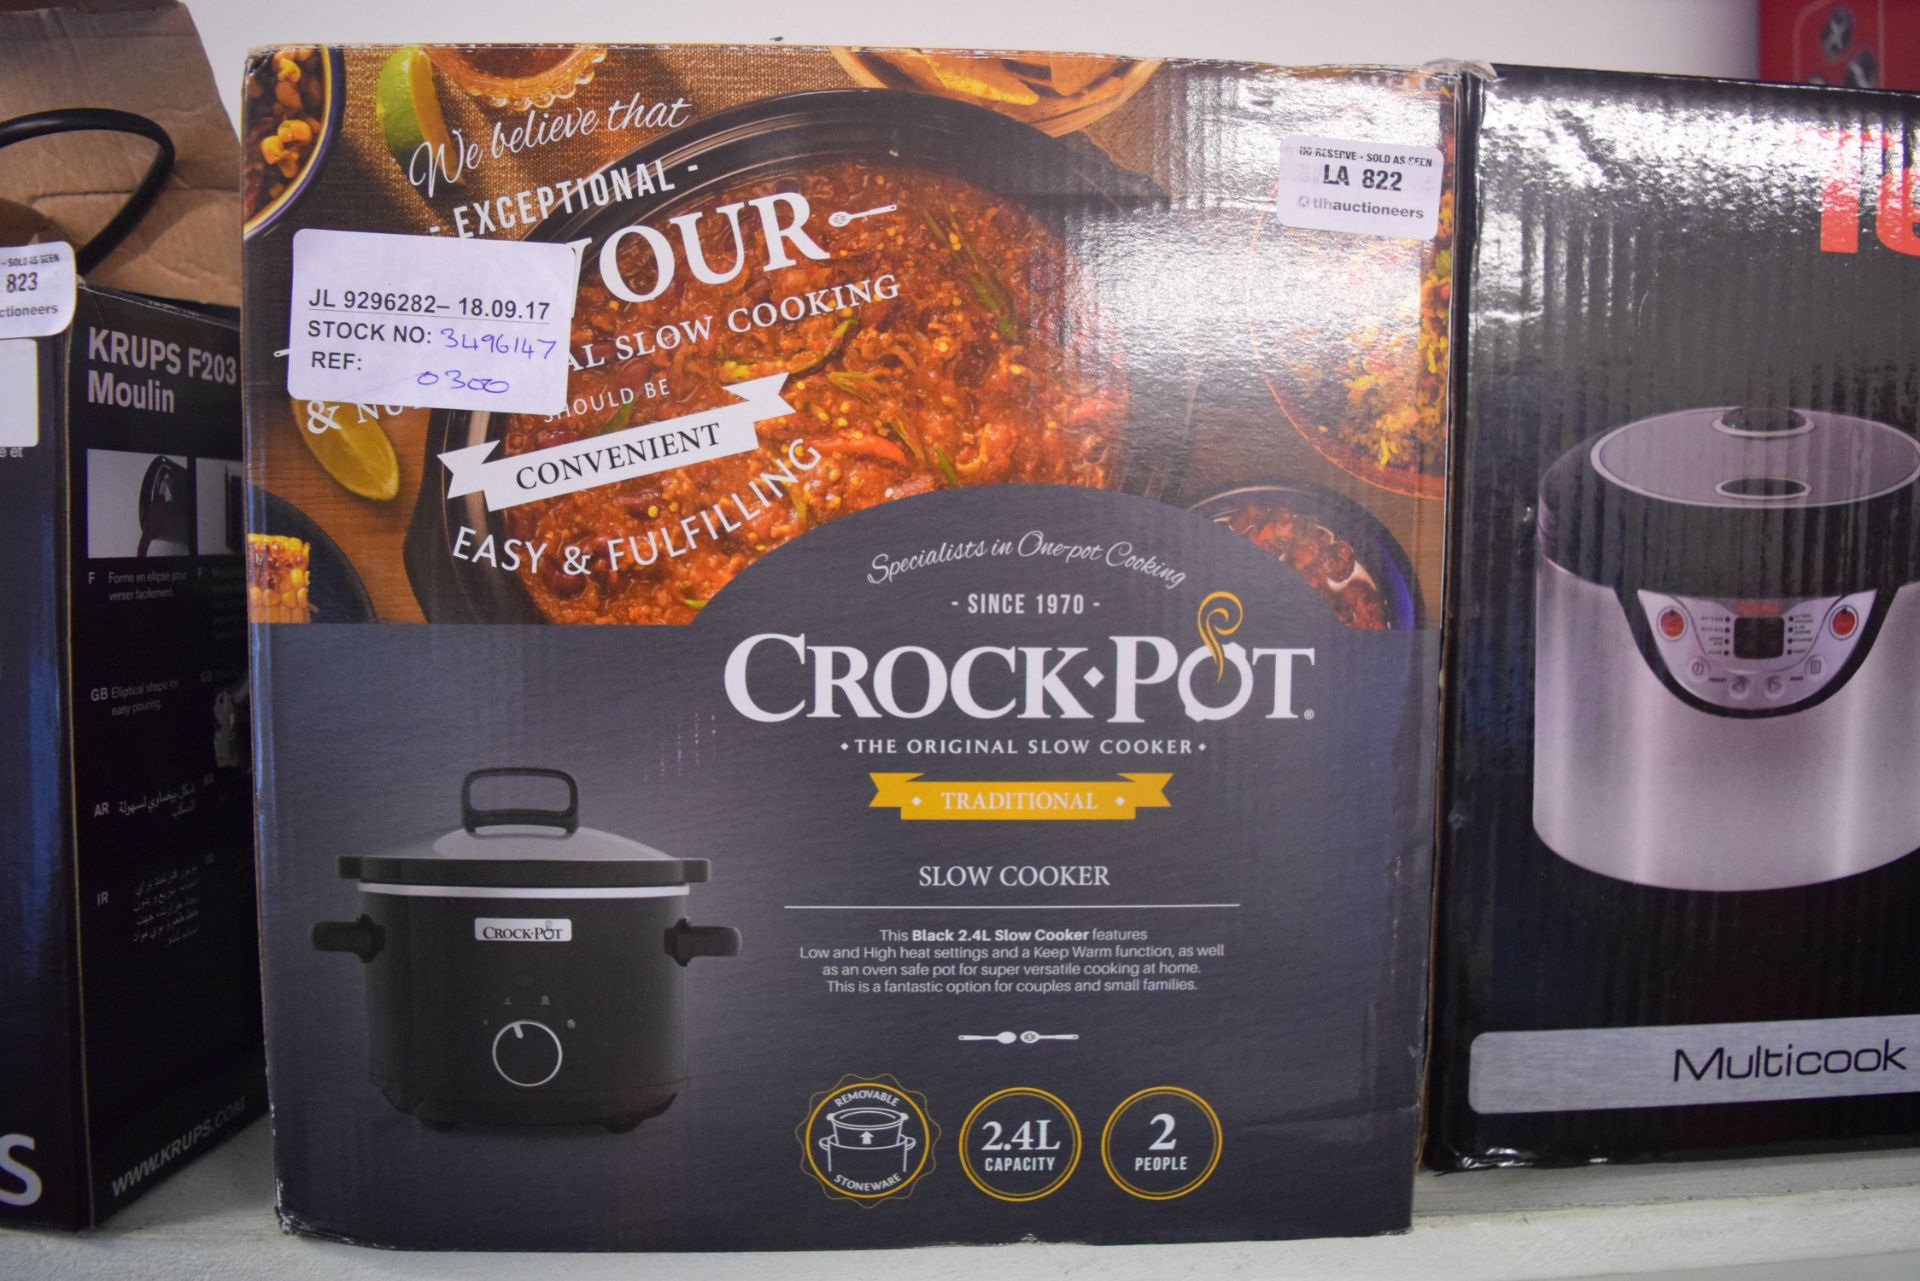 1 x BOXED CROCK POT 2.4L CAPACITY RRP £30 18/09/17 3496147 *PLEASE NOTE THAT THE BID PRICE IS